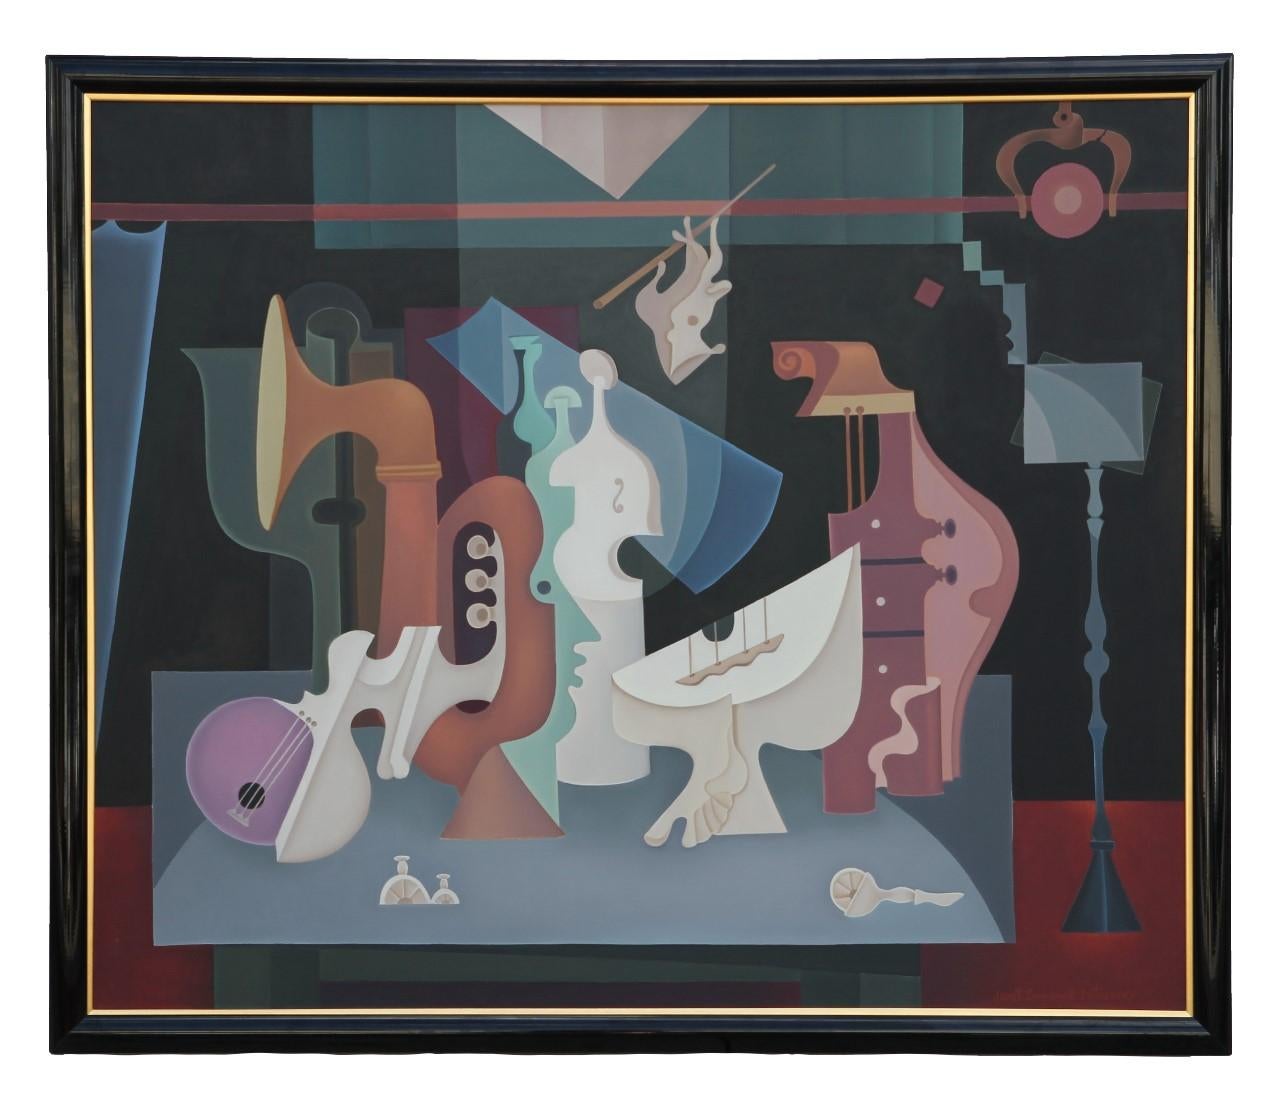 emmanuel Snitkovsky Still-Life Painting - "Symphony Still Life" Cubist Abstract of Instruments in the Style of Picasso